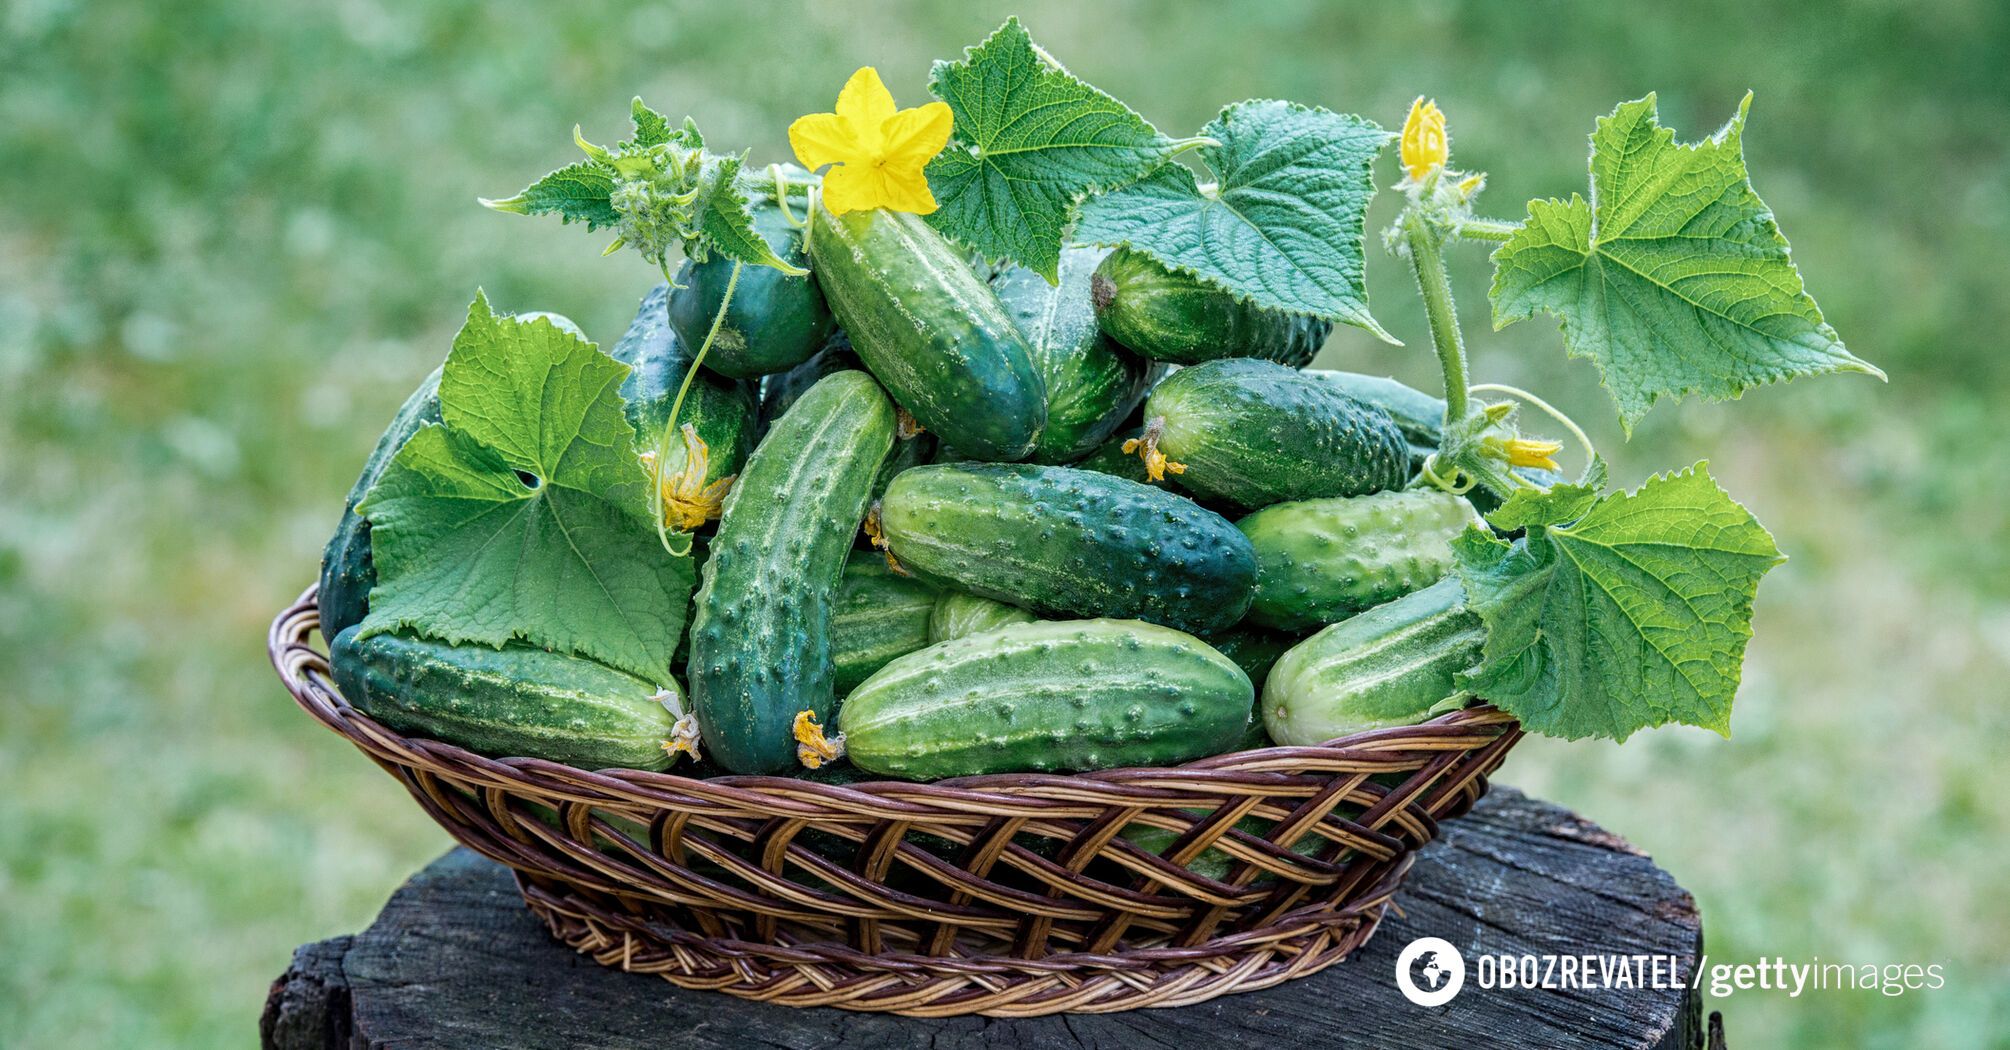 Cucumbers are a good source of vitamins and minerals